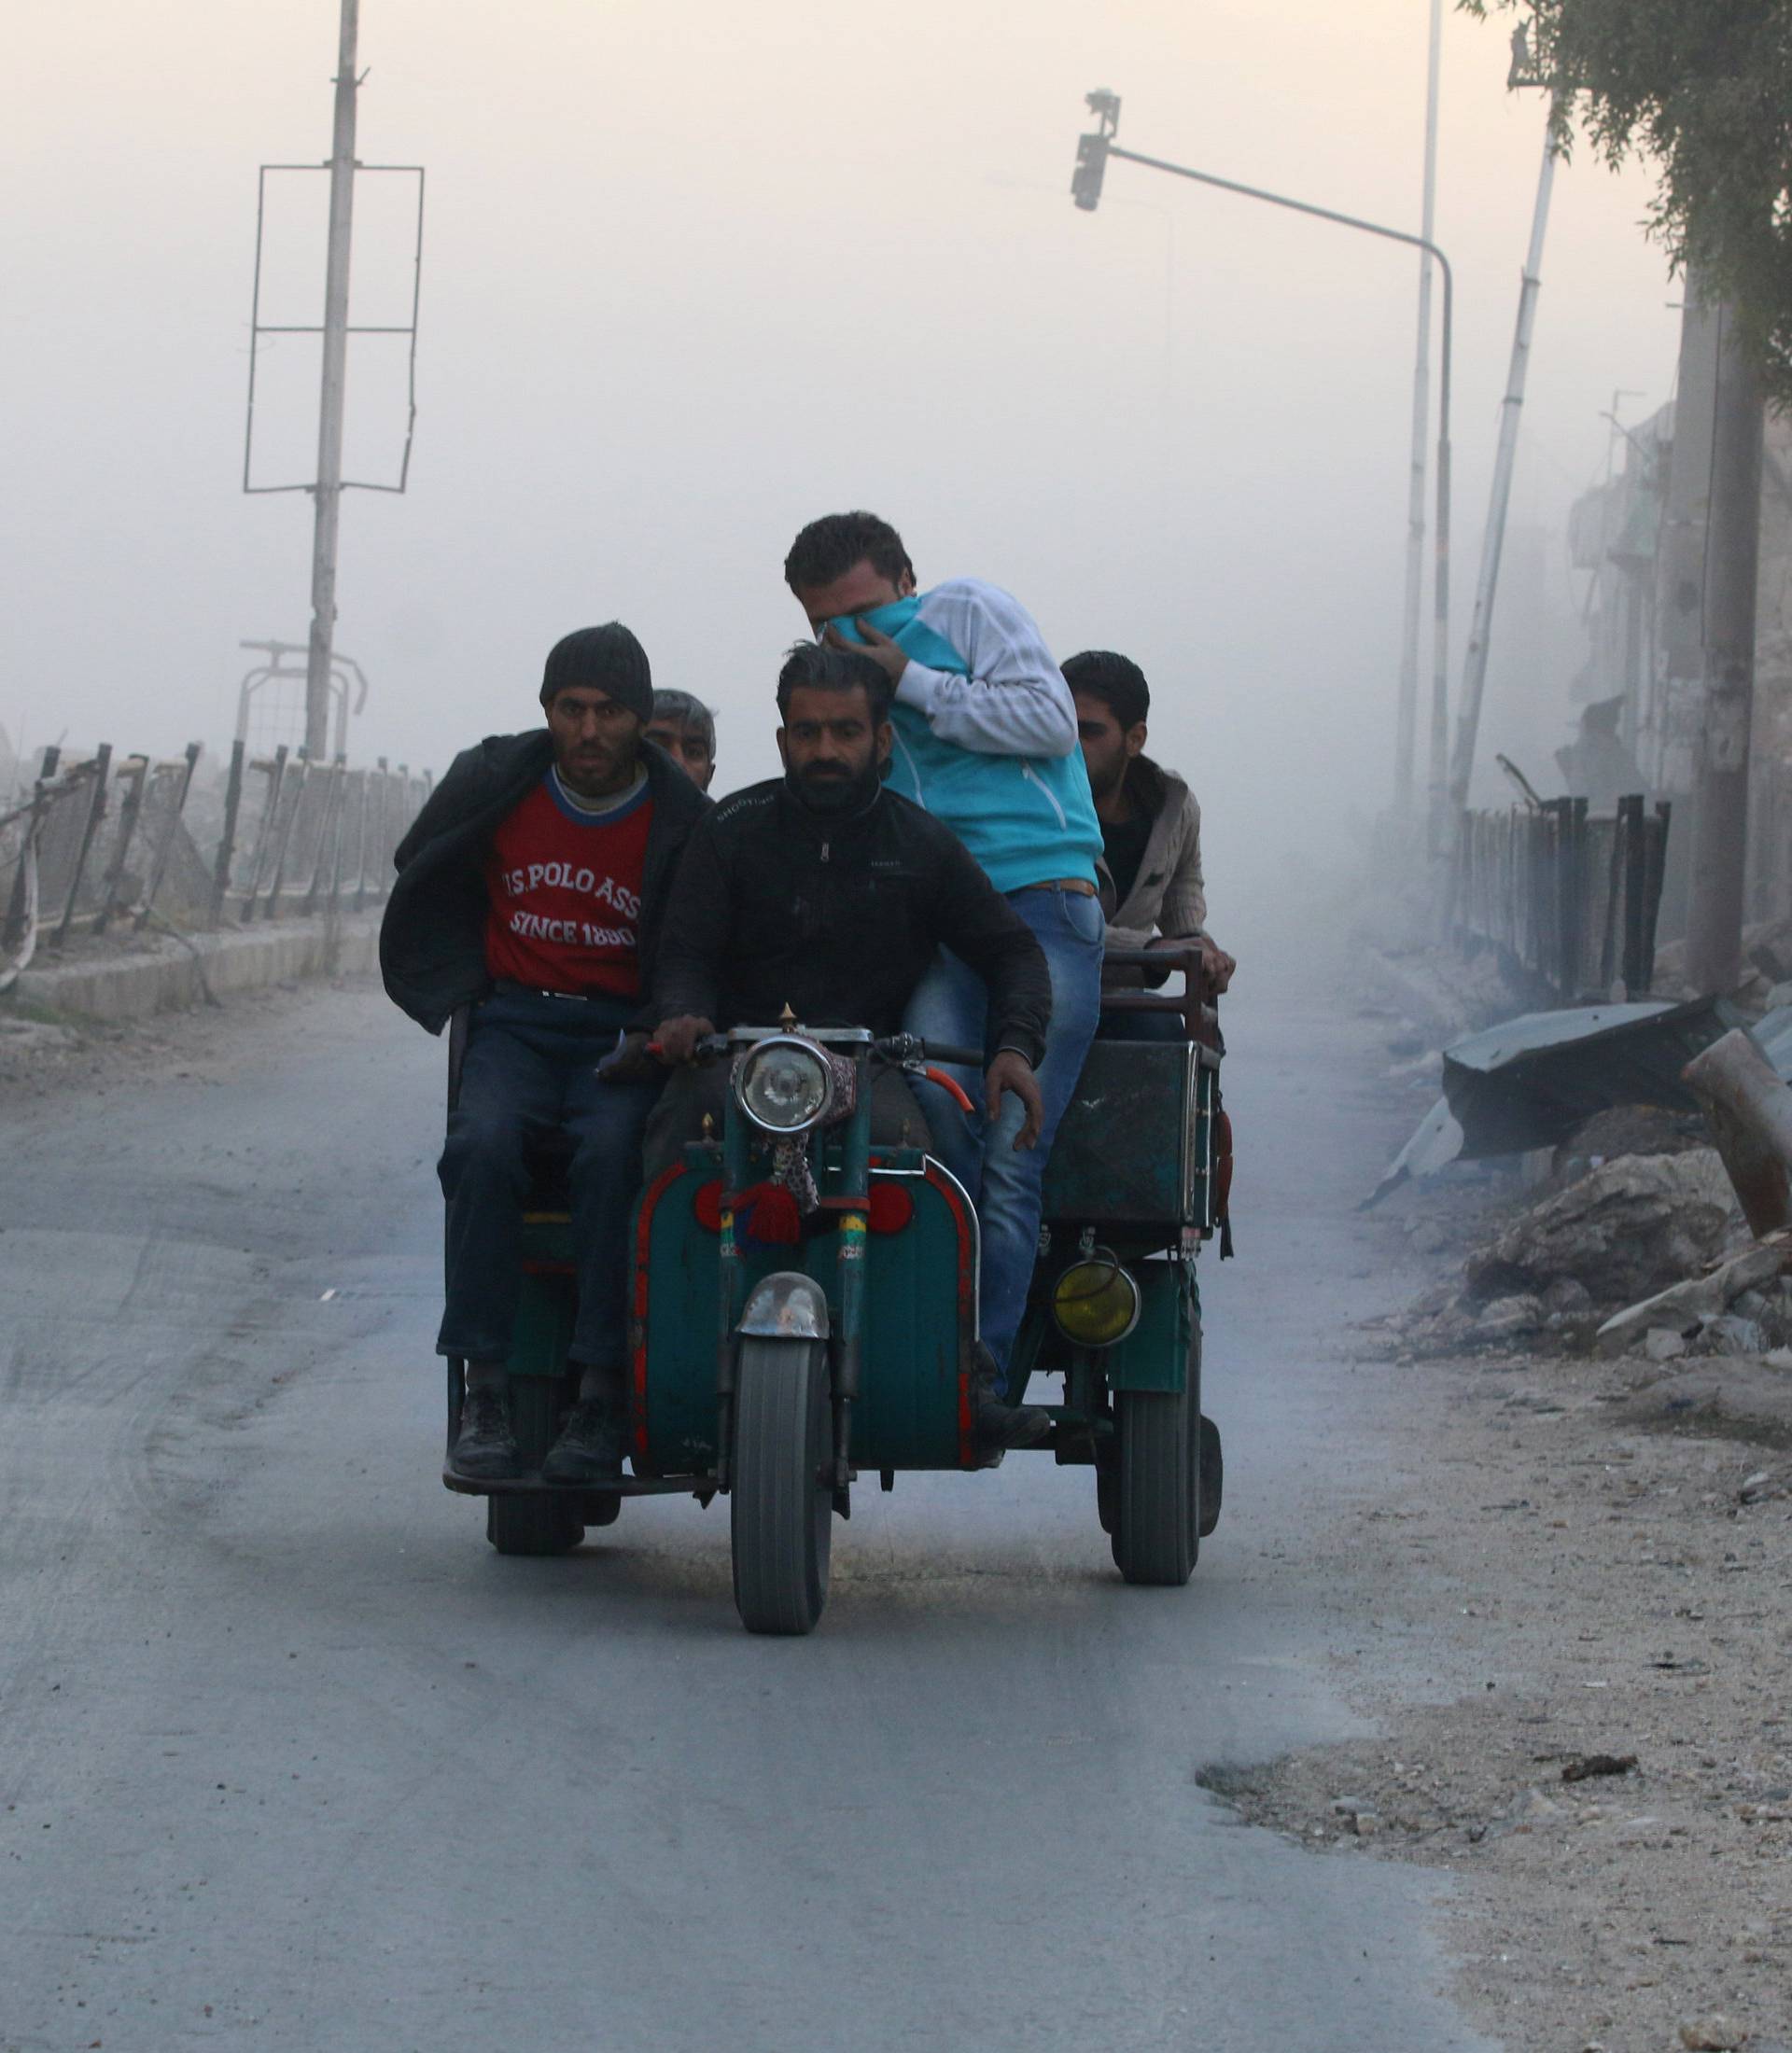 Men ride on a vehicle amidst dust after a strike on the rebel held besieged al-Shaar neighbourhood of Aleppo, Syria